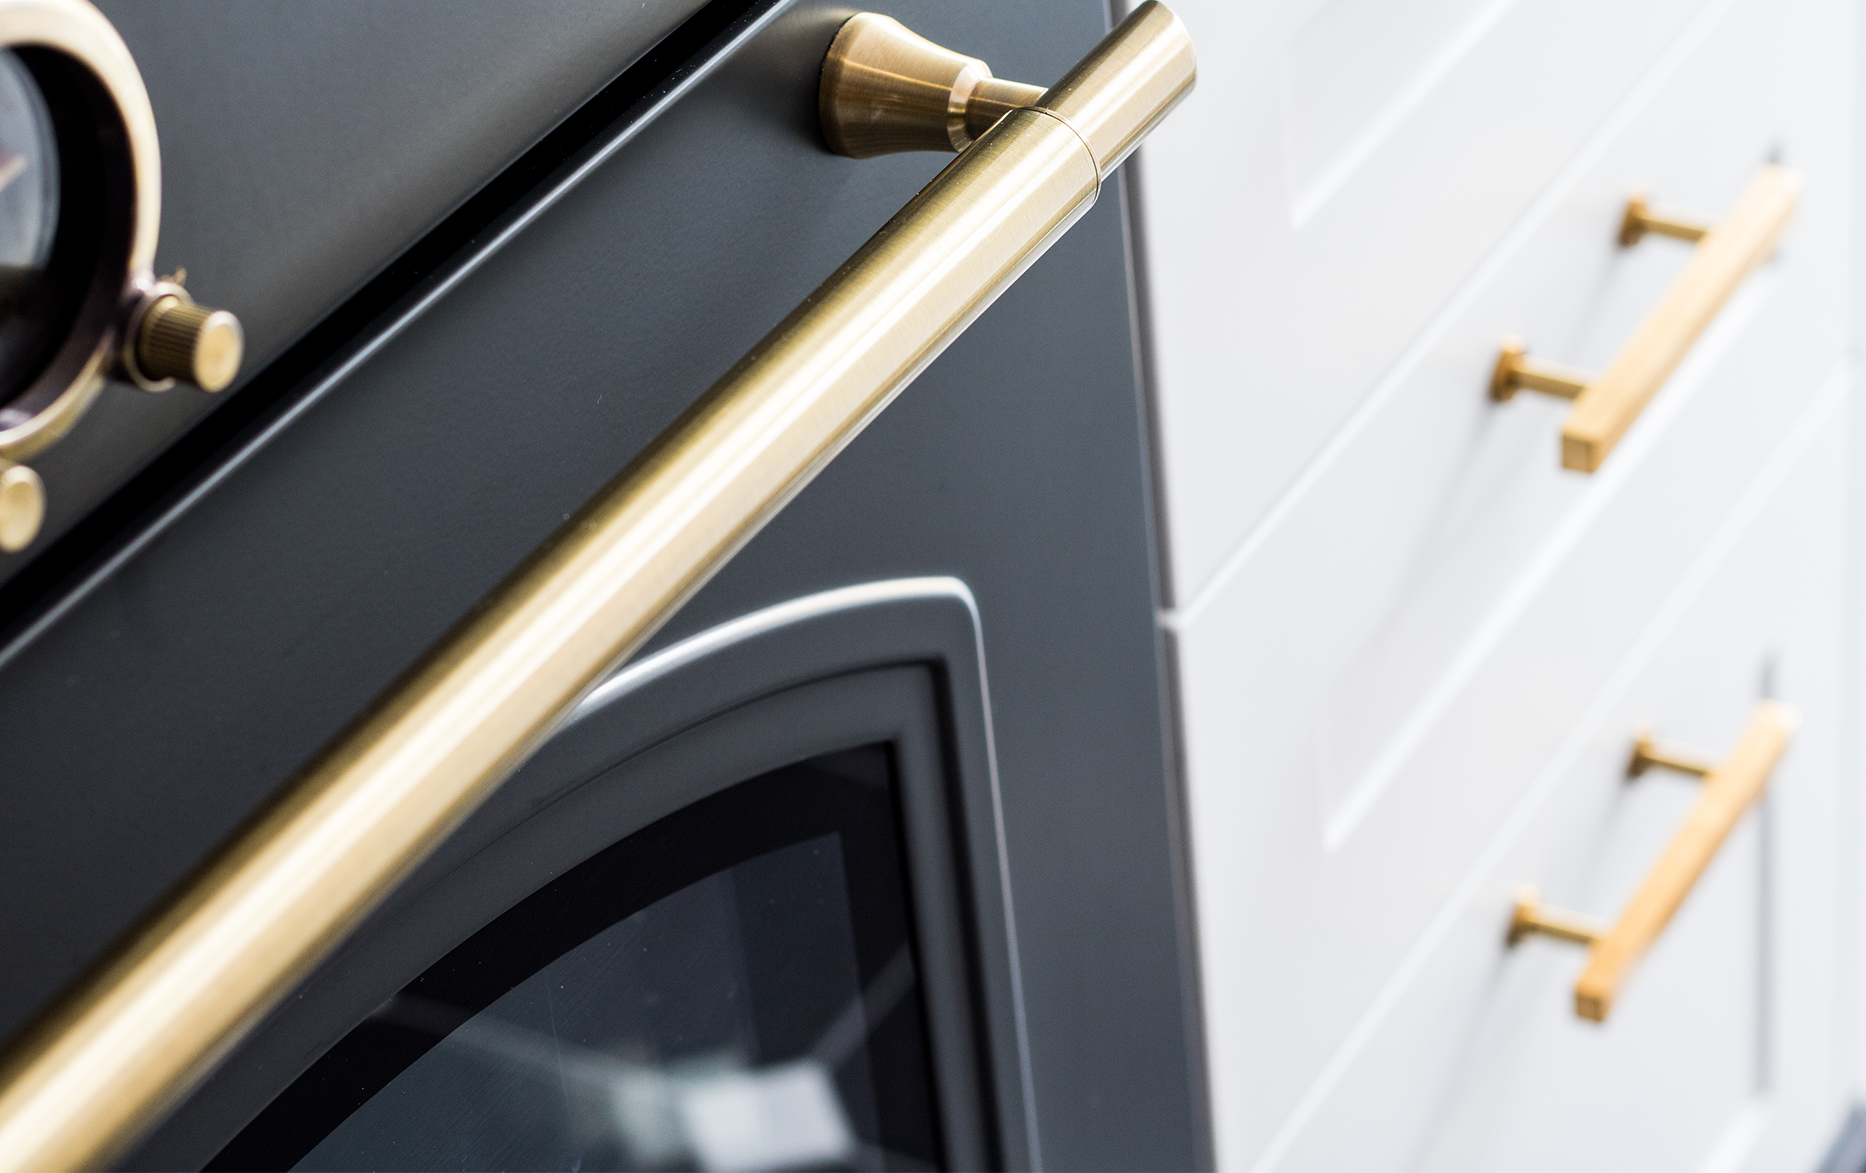 How to Disinfect Kitchen Handles